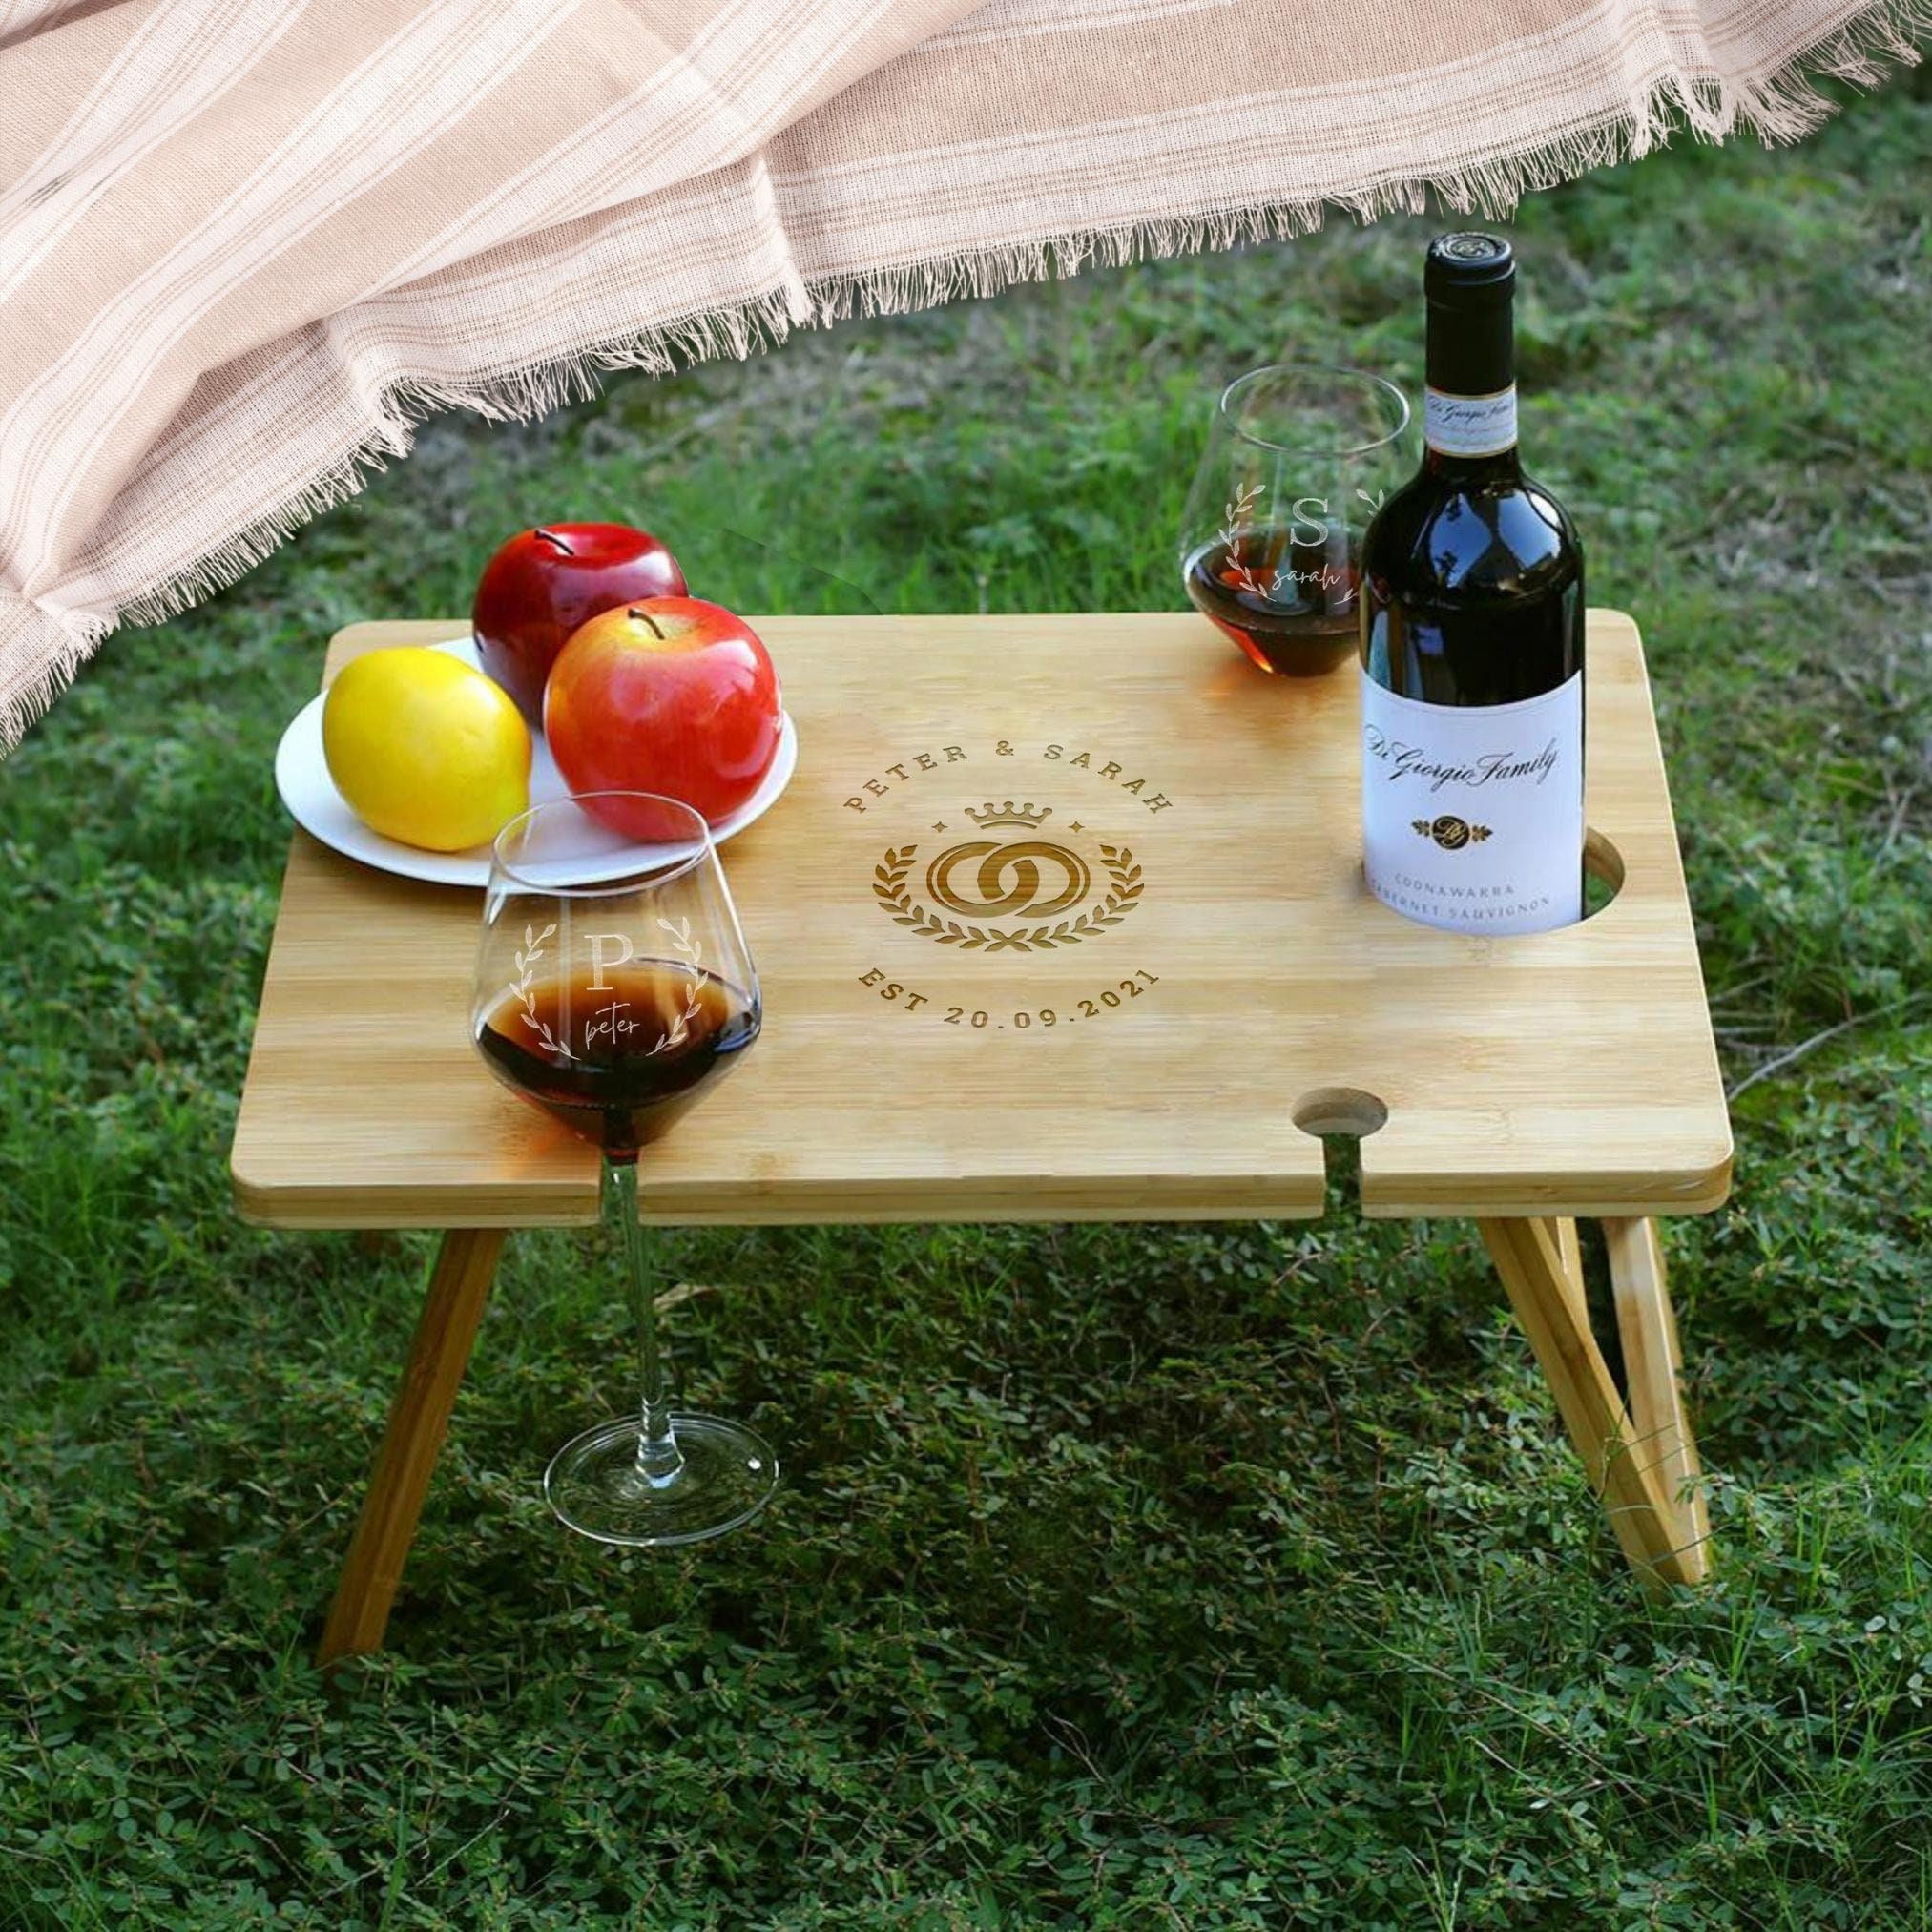 Youeon Portable Wine Picnic Table with 5 Wine Glasses Holder, Foldable  Champagne Picnic Snack Table, Wine and Cheese Table for Picnic, Camping,  Park